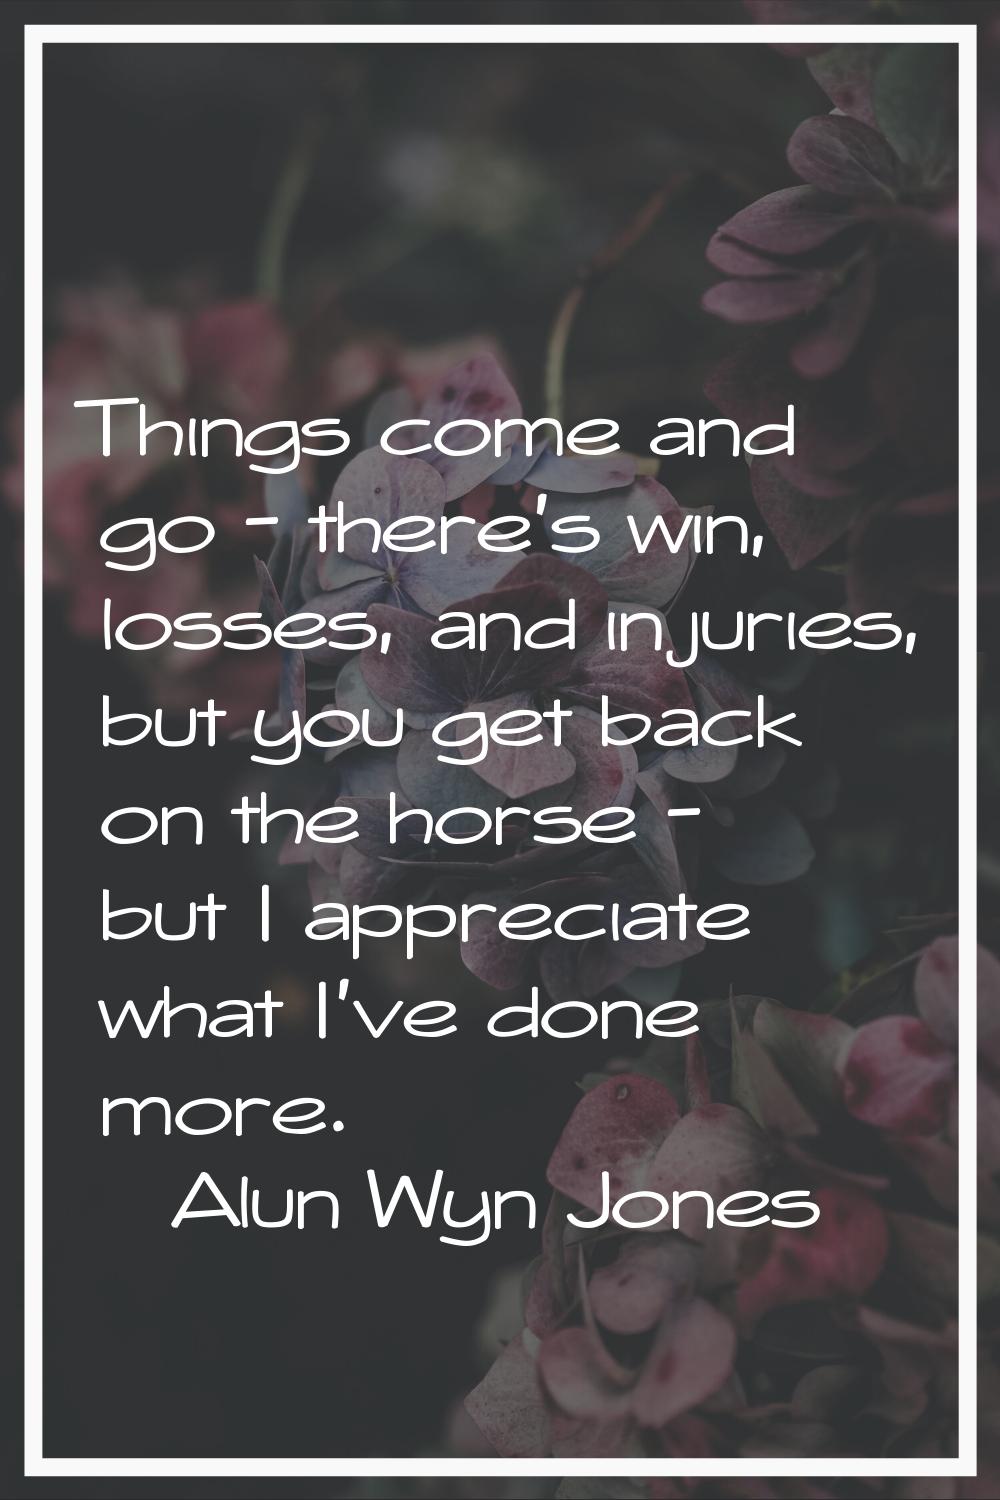 Things come and go - there's win, losses, and injuries, but you get back on the horse - but I appre